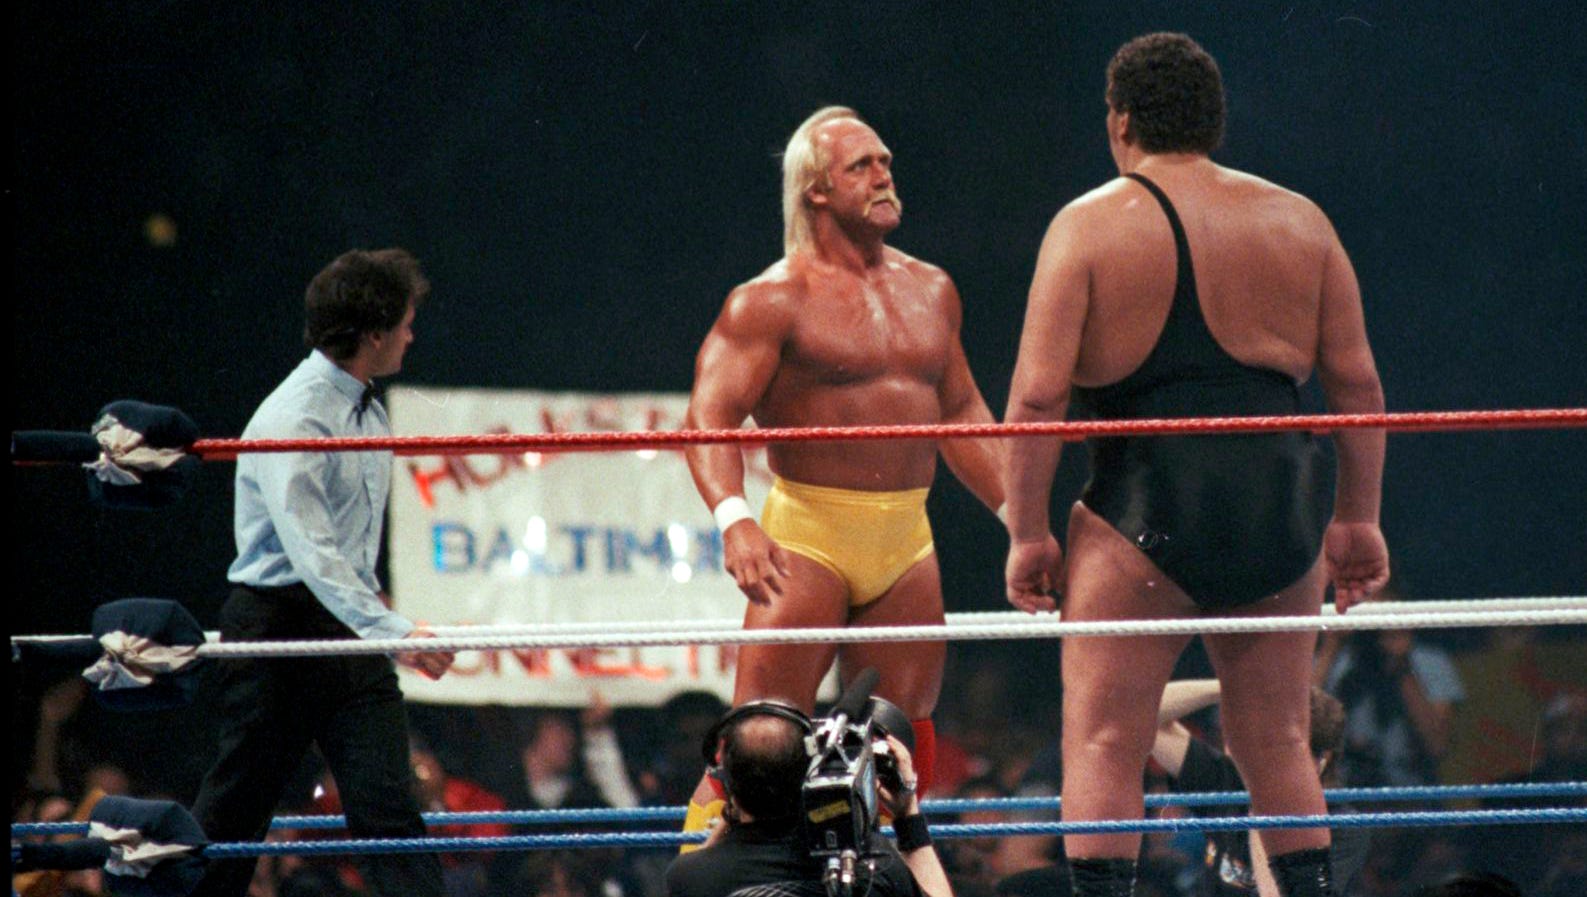 While the match is considered a classic, Hulk Hogan-Andre the Giant didn't feature a ton of actual wrestling, because Andre's surgically repaired back was in bad shape.